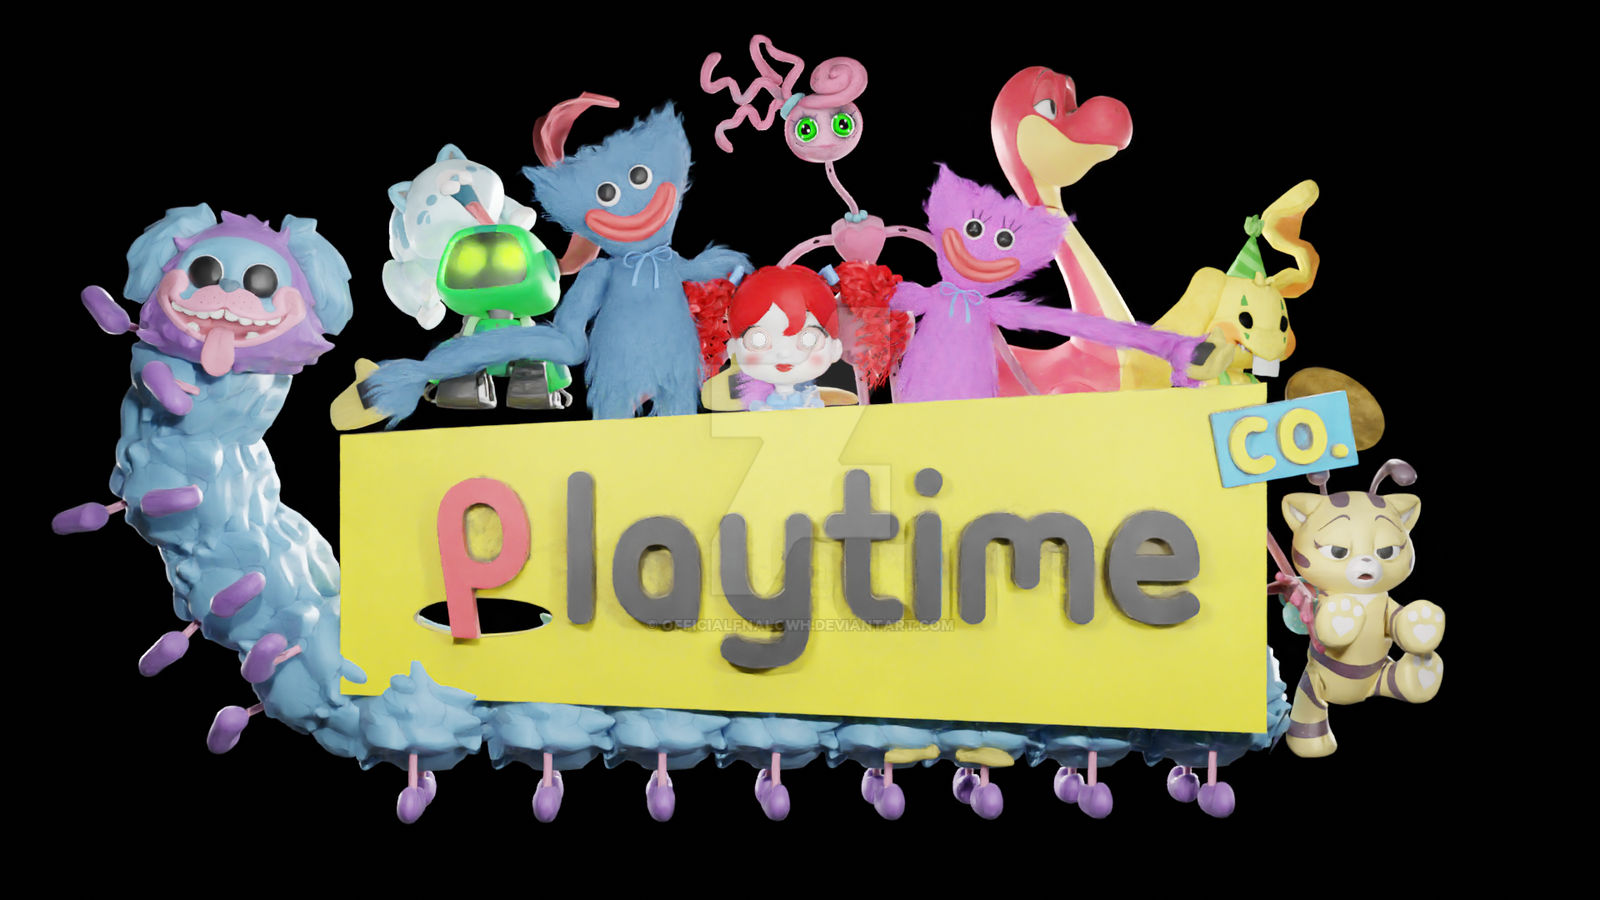 The old Playtime Co. Logo